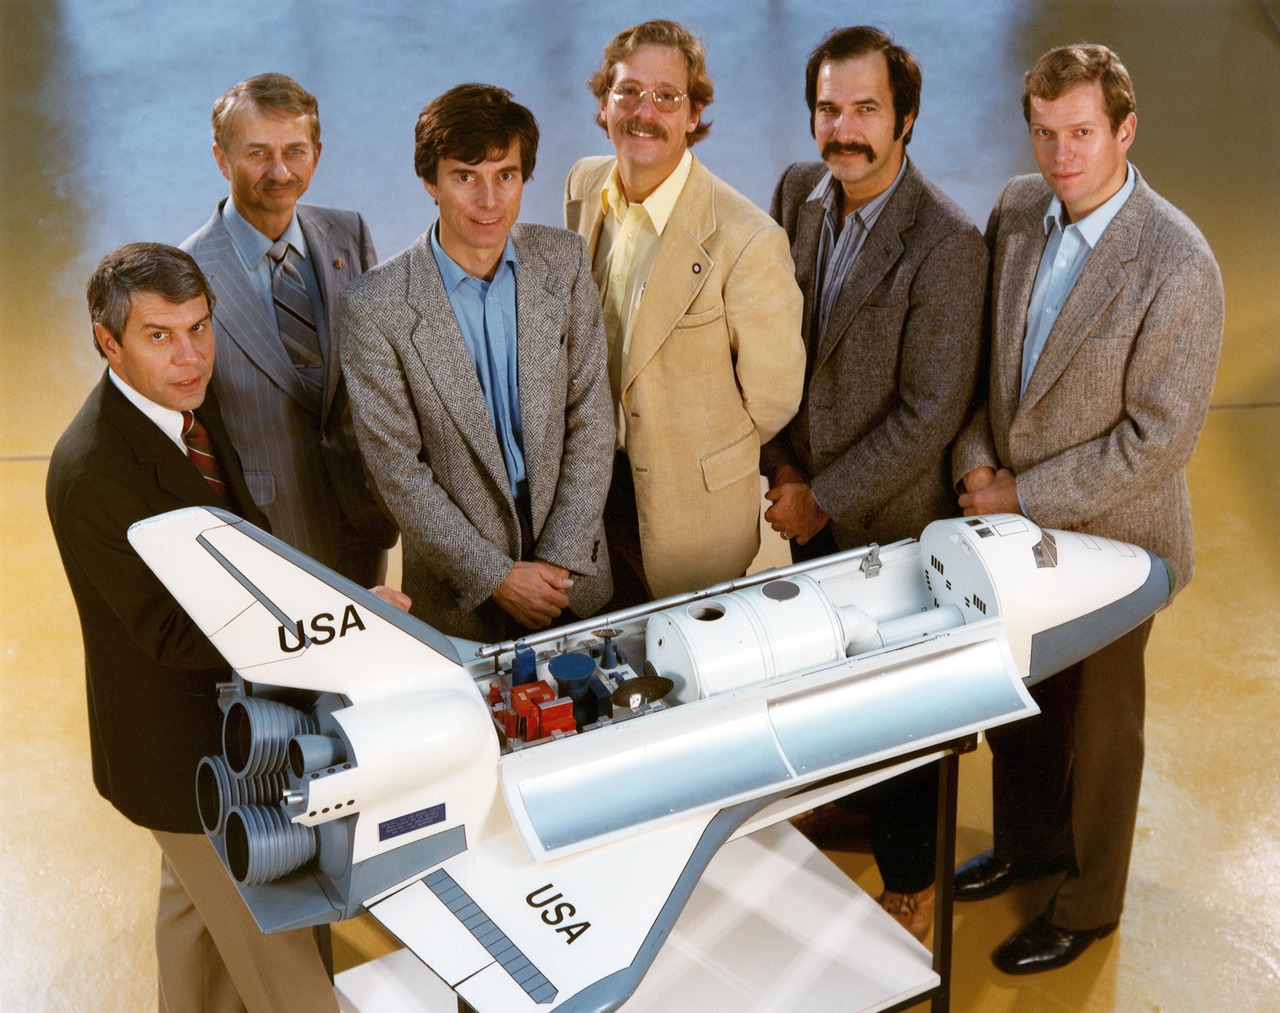 The mission specialists and payload specialists of STS-9 poses next to a model of the Space Shuttle